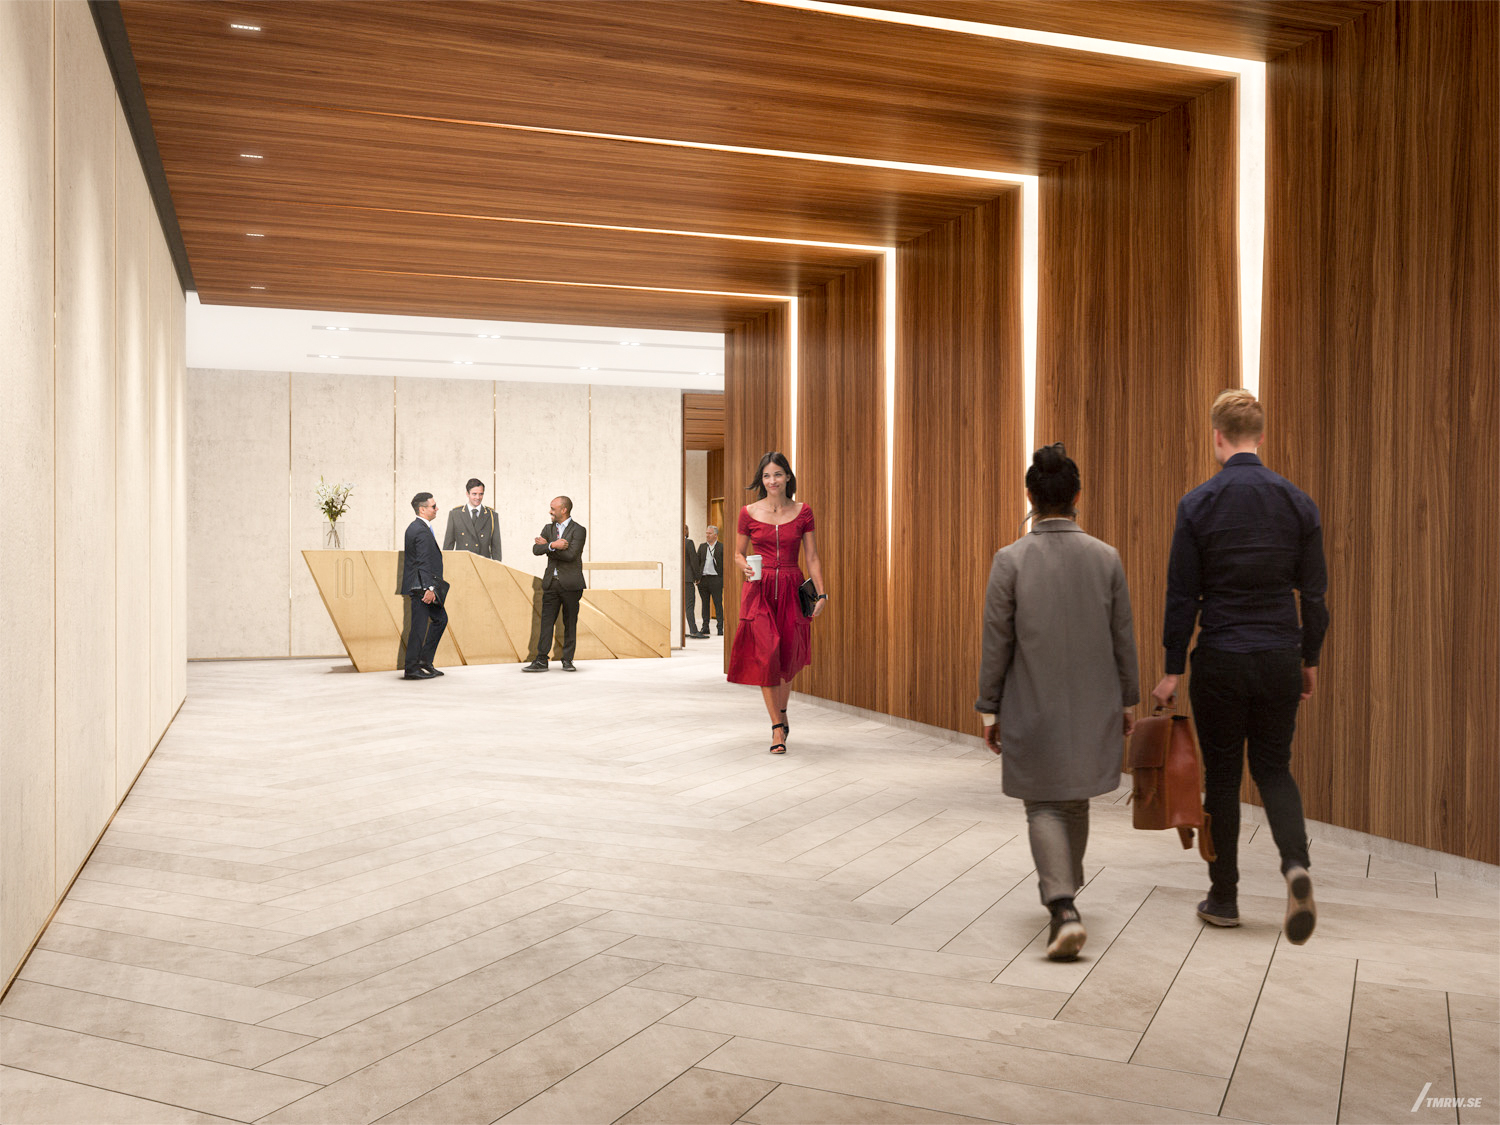 Lobby hallway at 10 Grand Central, design by Studio Architecture